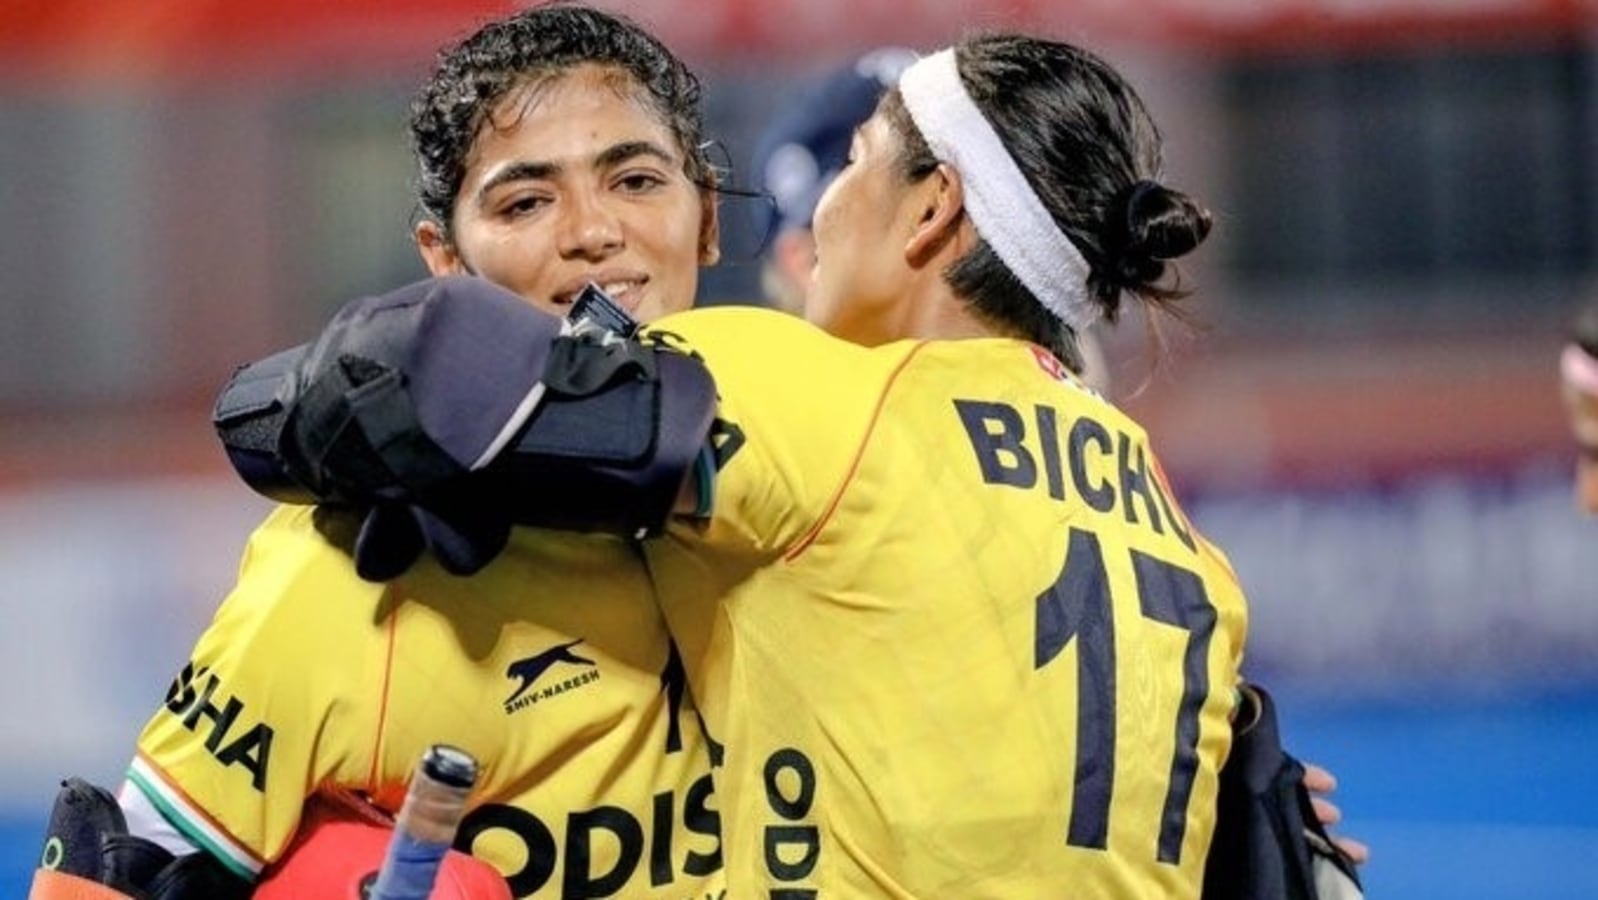 Womens Hockey WC 2022 India vs England Live Streaming When and where to watch Hockey